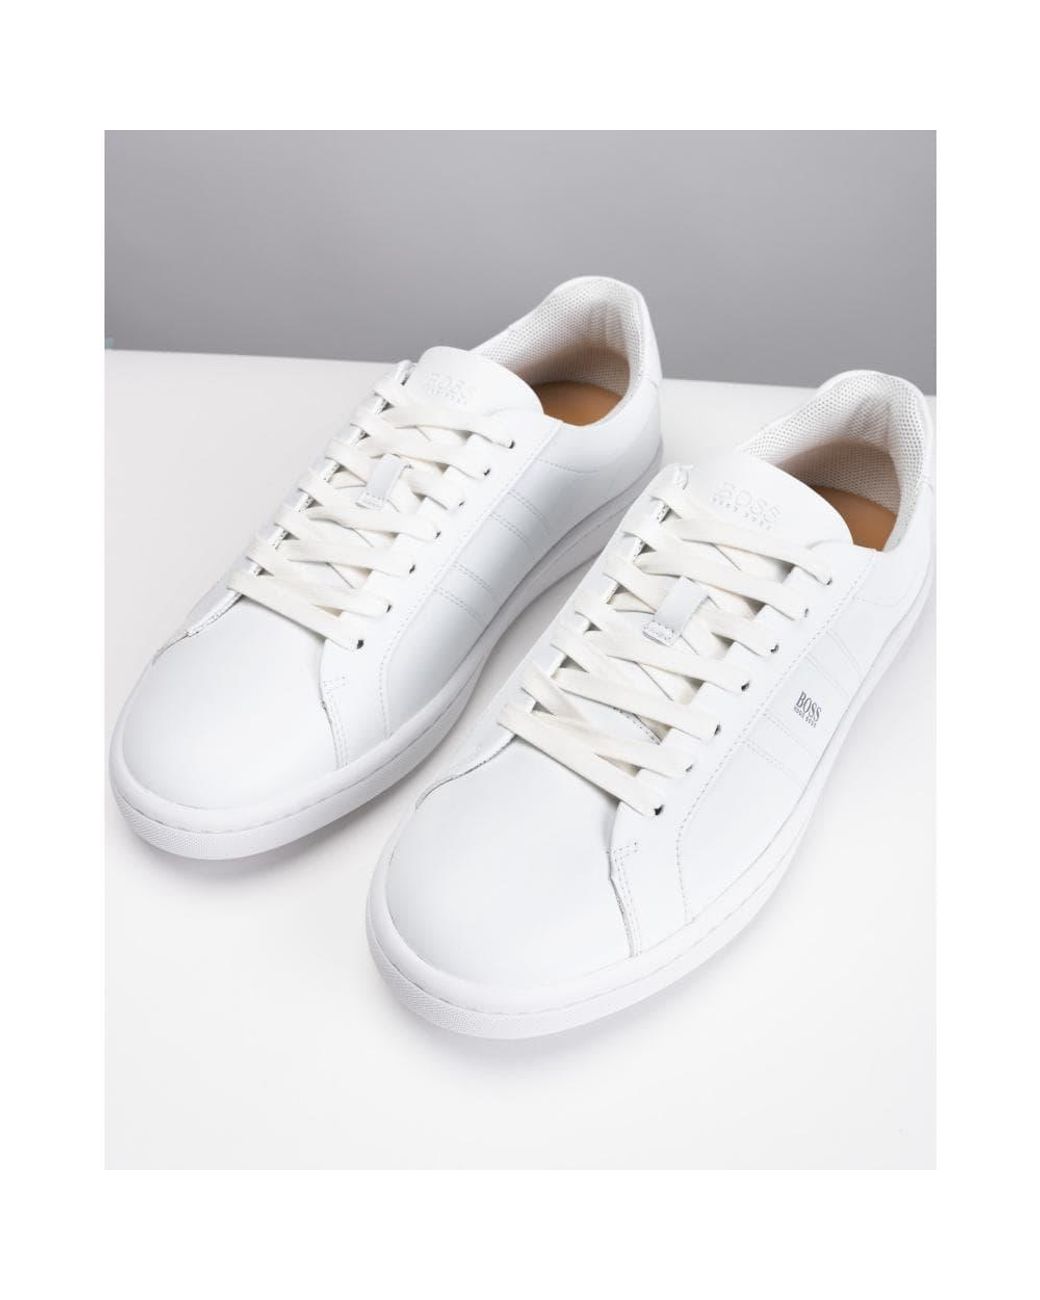 BOSS by HUGO BOSS Ribeira Tenn Ltpl Leather Trainers in White for Men |  Lyst Canada